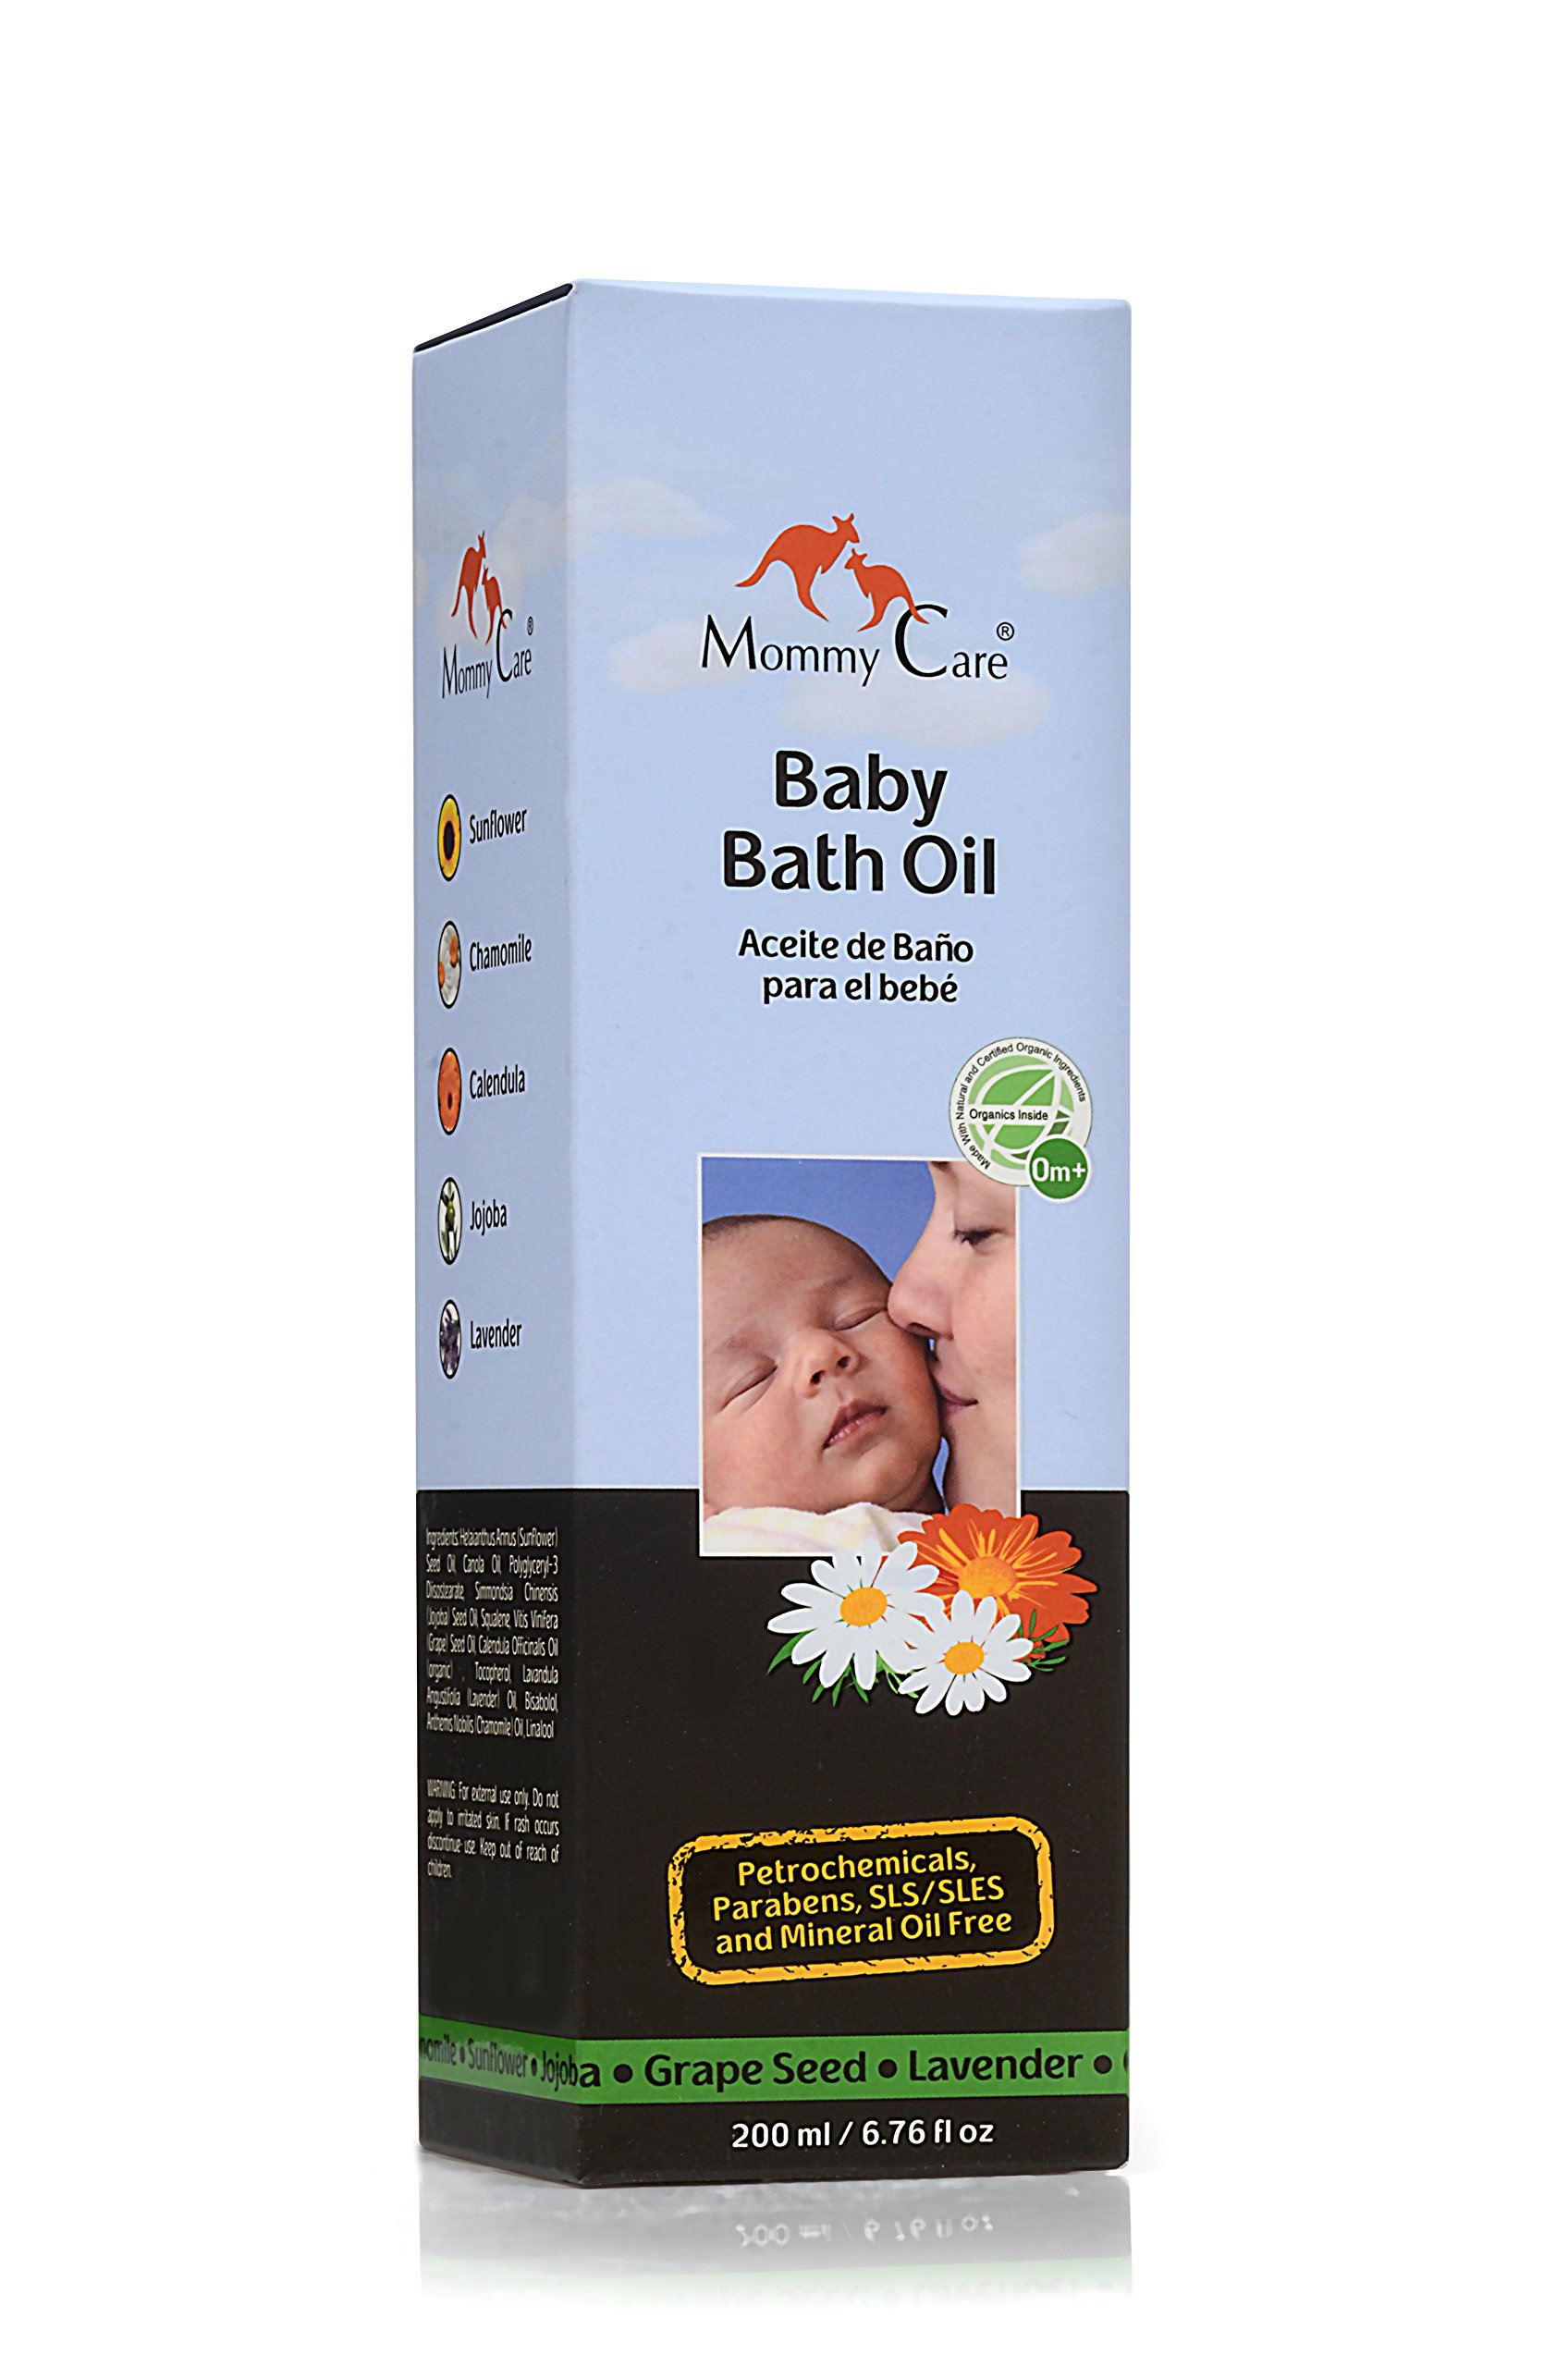 Mommy Care Organic Baby Bath Oil Pure Natural Essential Oils, Calming, Hydrating, and Nourishing Bathing Oil to Restore Your Baby’s Natural Skin Moisture. Great for Irritated or Dry Skin. 6.76 oz